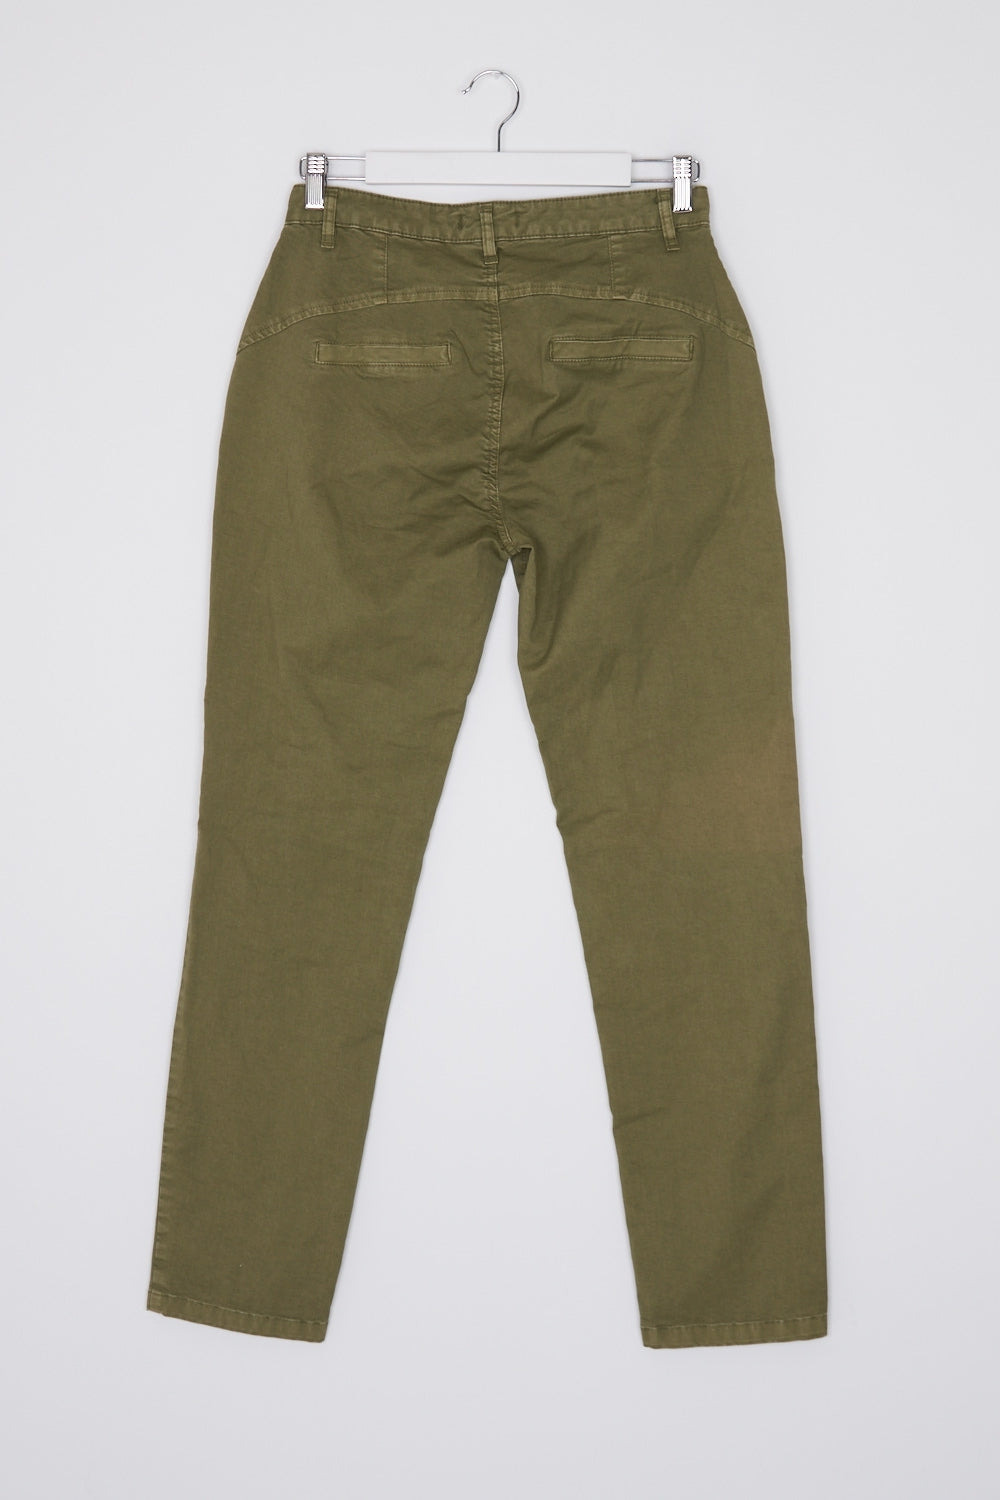 Ridley Green Cargo Jeans M